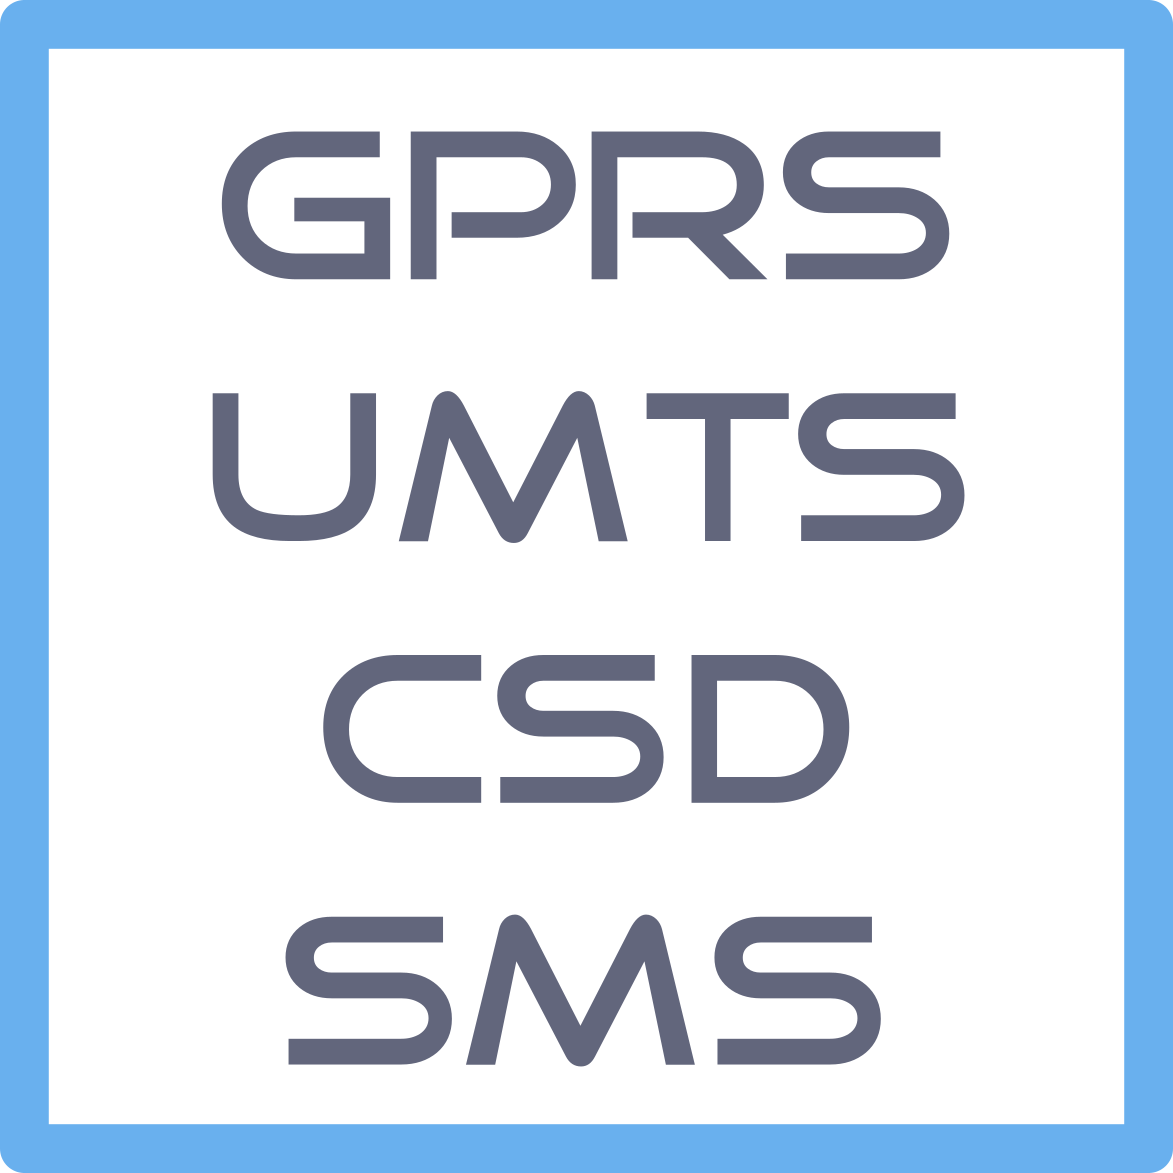 GPRS UMTS CSD SMS_2.png